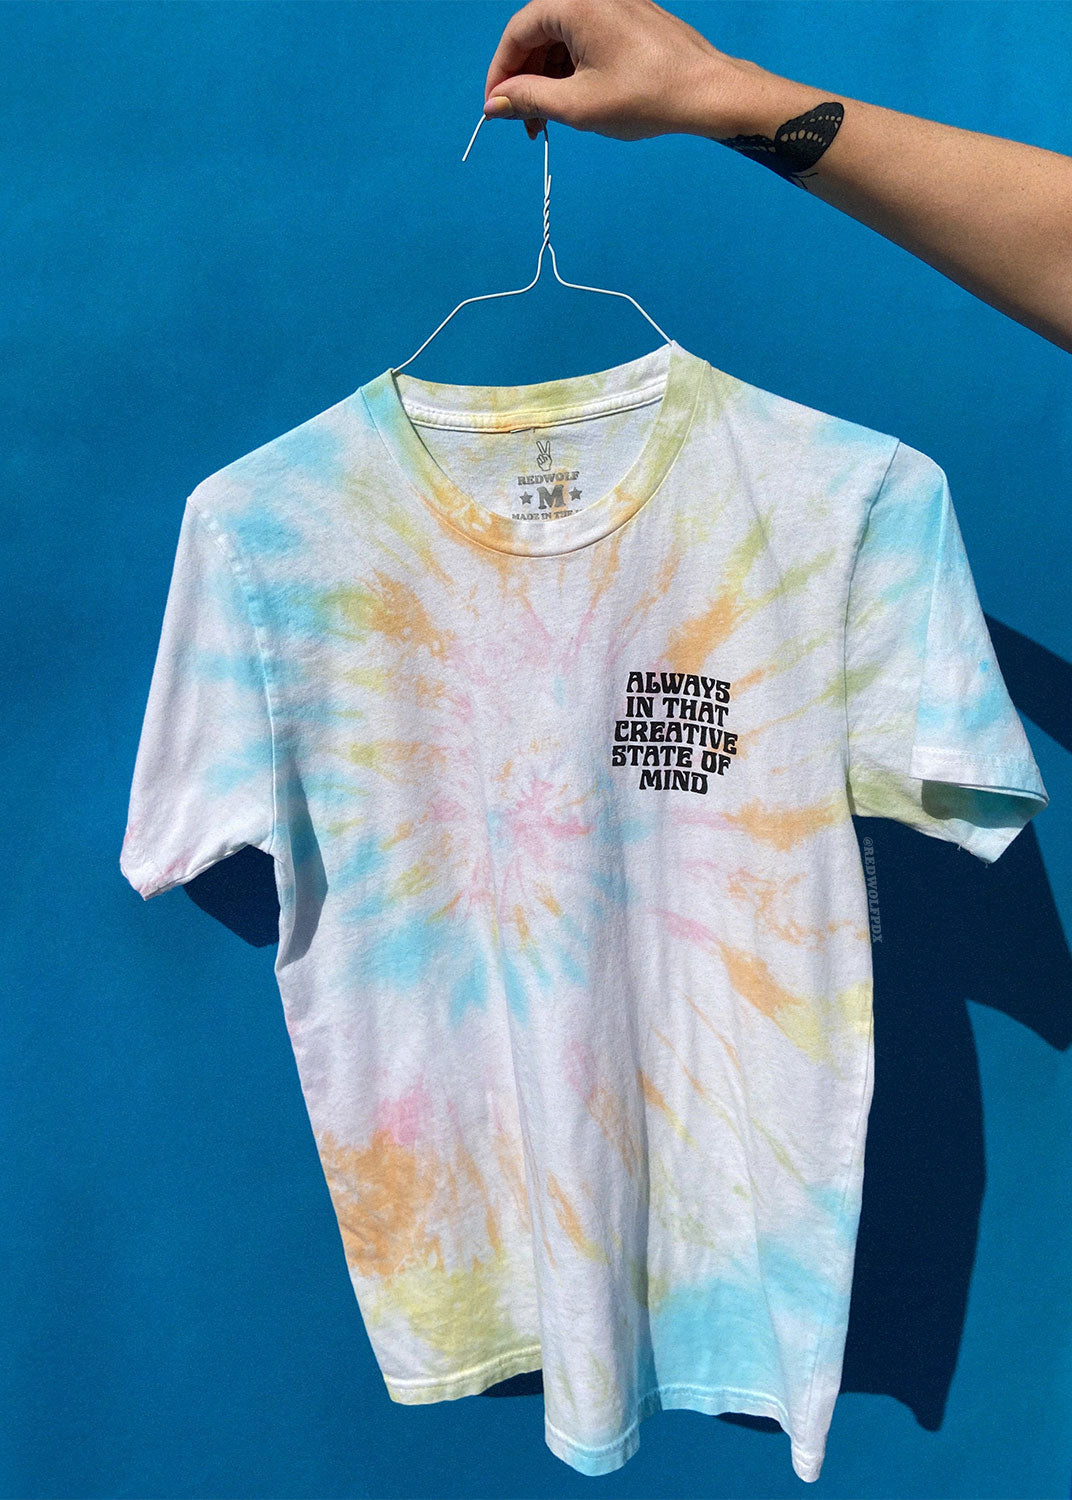 ALWAYS IN THAT CREATIVE STATE OF MIND TIE DYE TEE